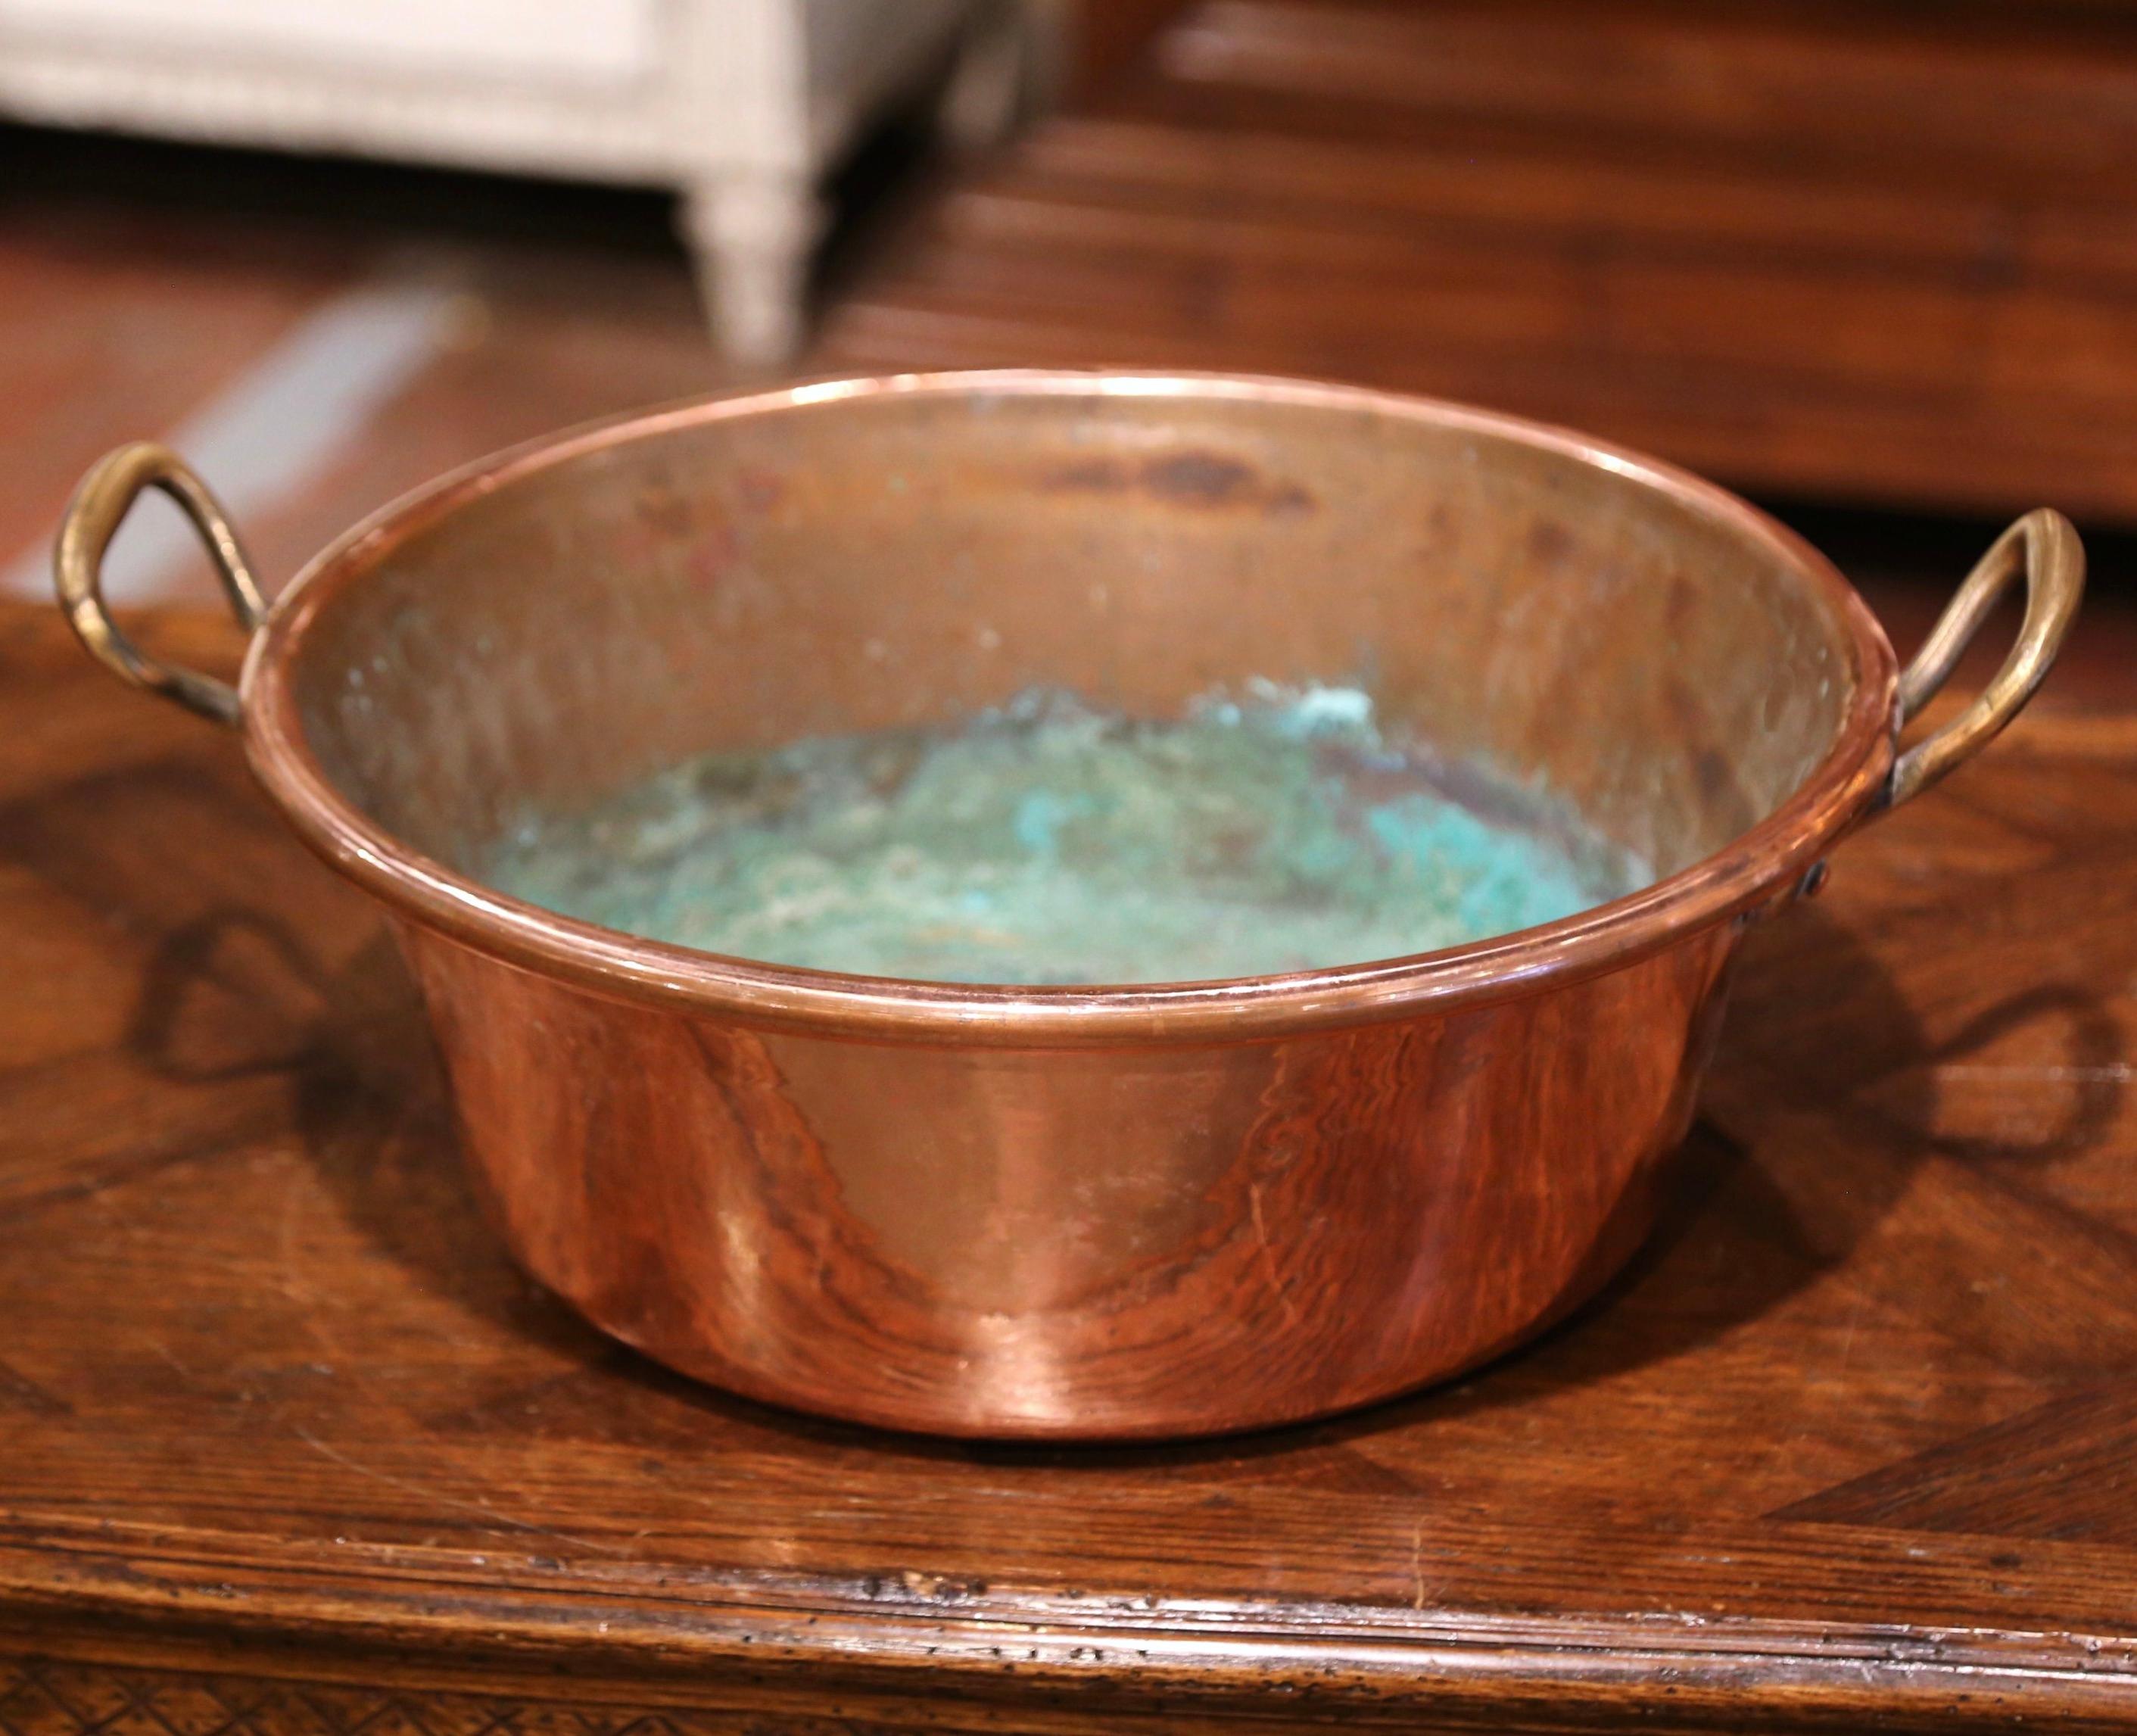 Bring an authentic French countryside touch to your kitchen with this large antique copper marmalade bowl. Crafted in Normandy, France, circa 1870, the decorative “Bassine a Confiture” (or jam bowl) is round in shape and dressed with two brass side